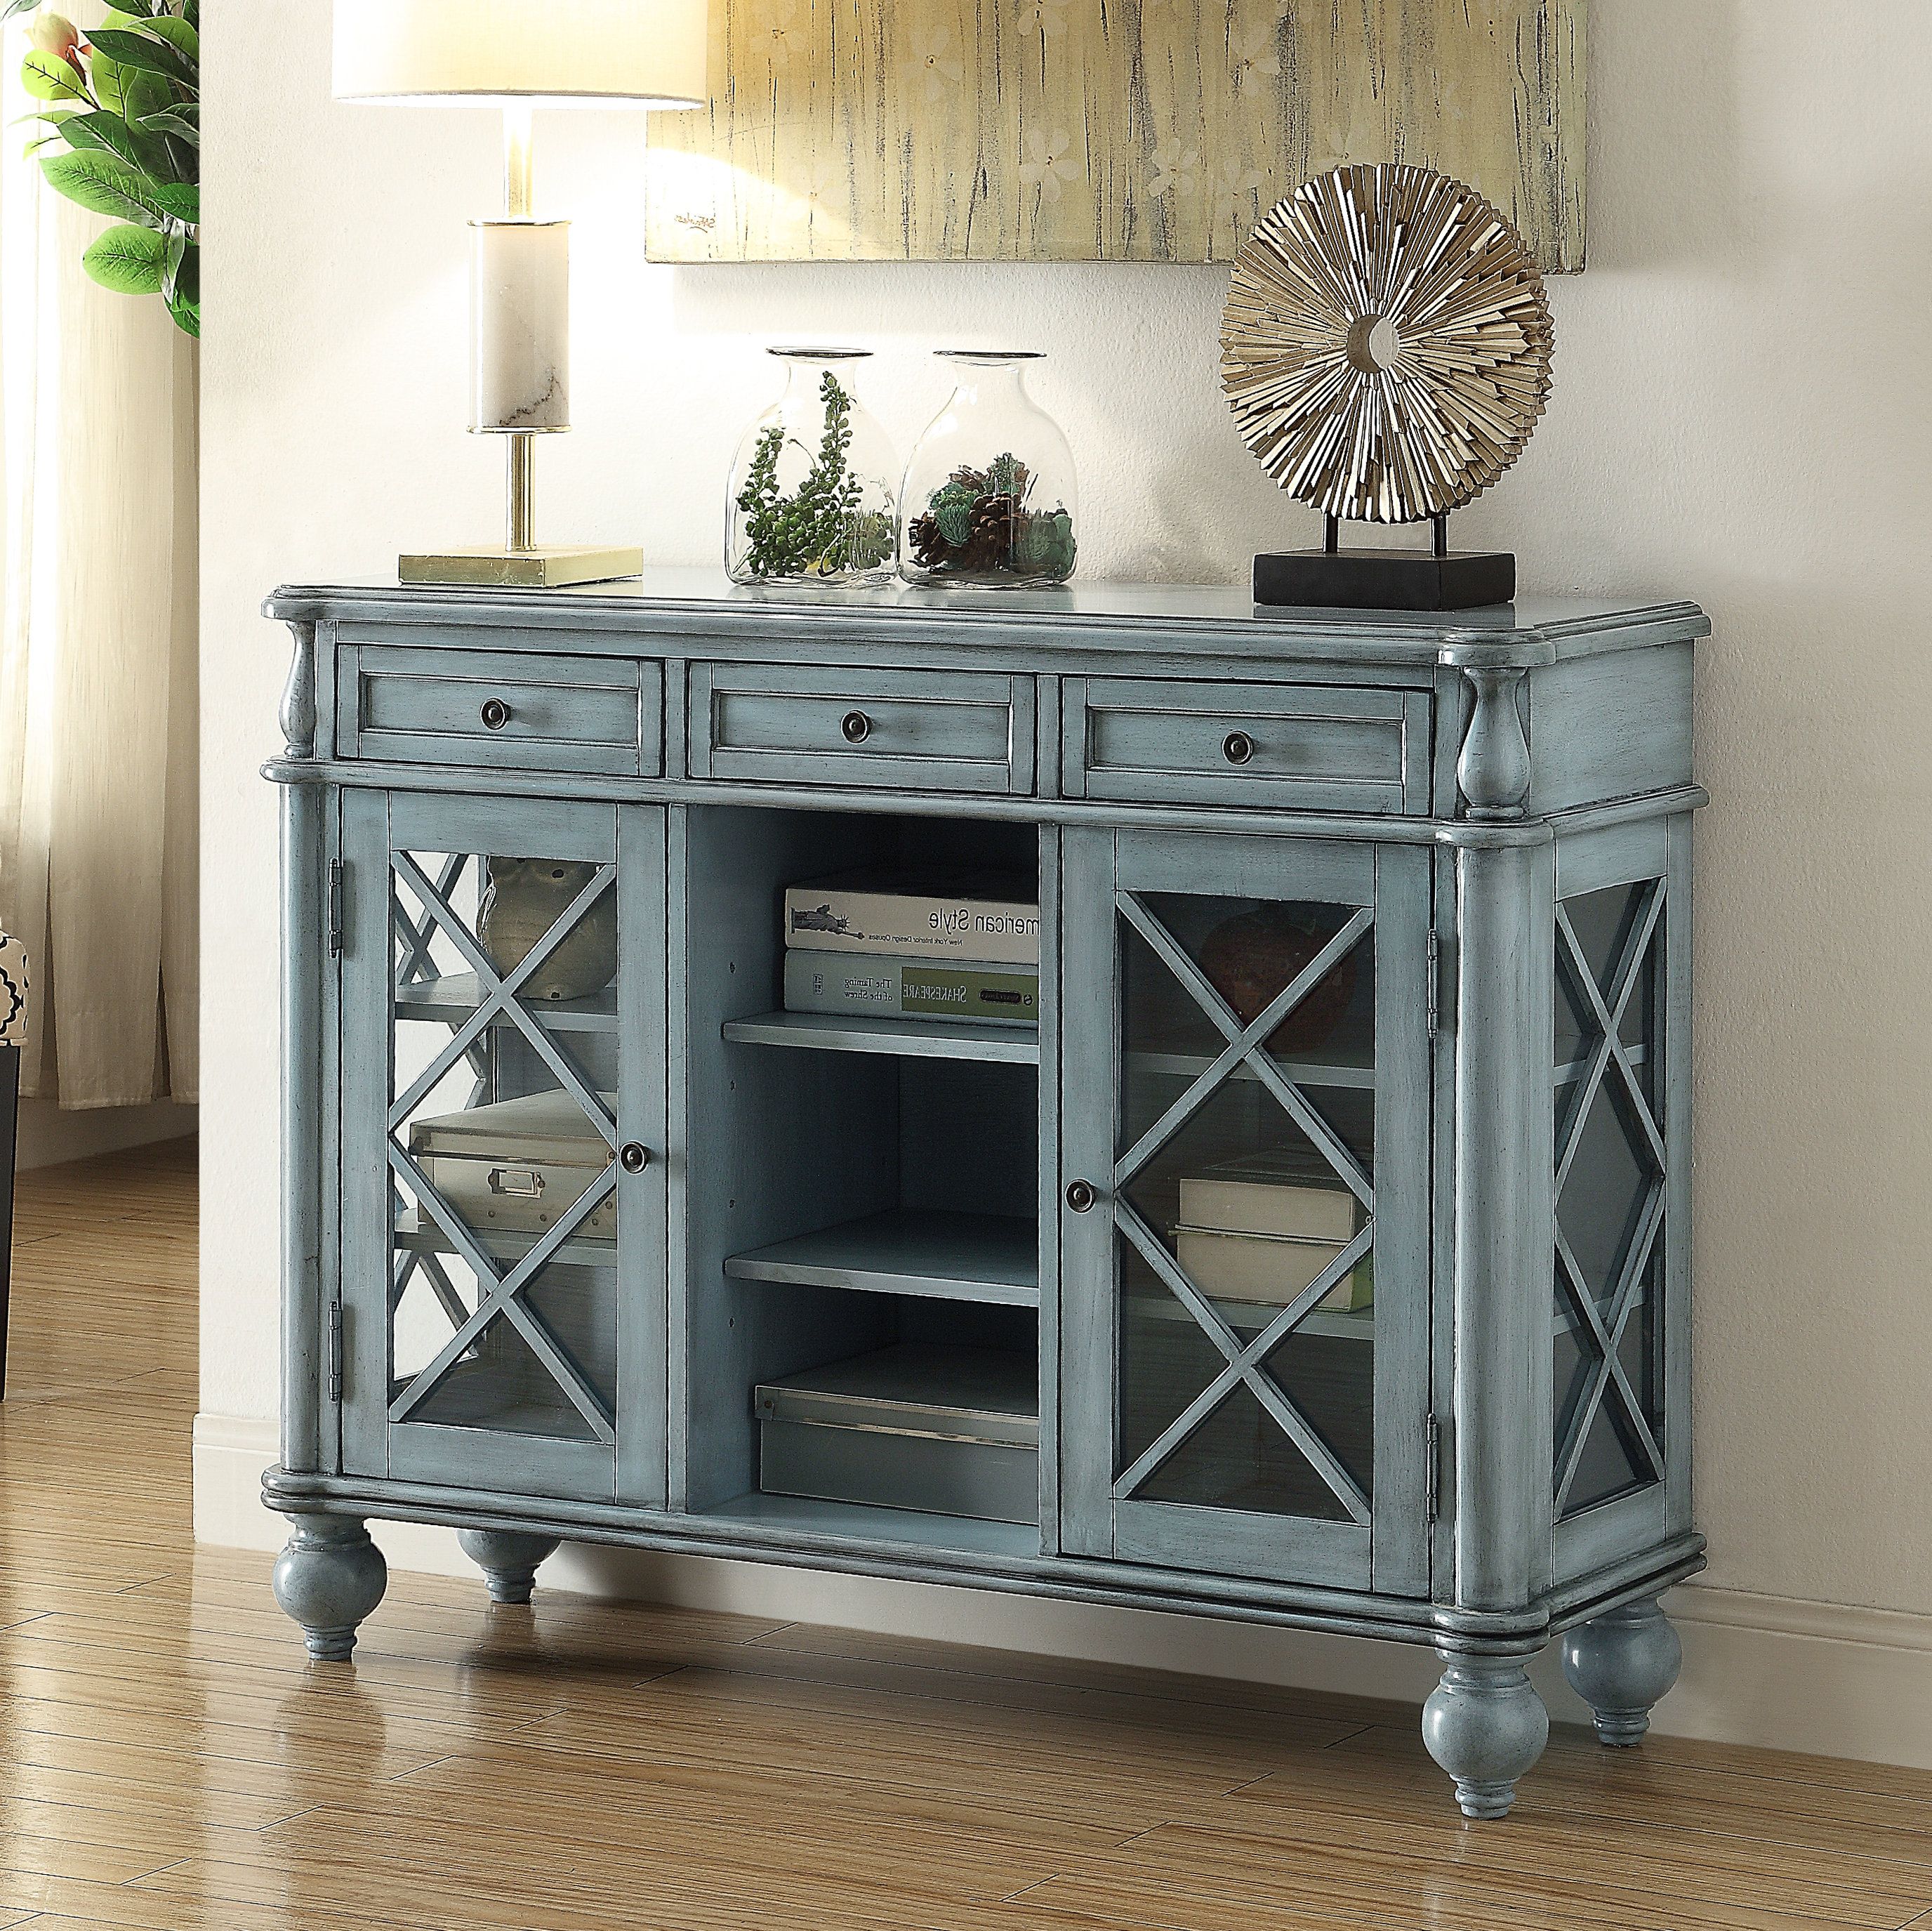 Sideboards & Buffet Tables You'll Love In 2019 | Wayfair Within Chicoree Charlena Sideboards (Gallery 8 of 20)